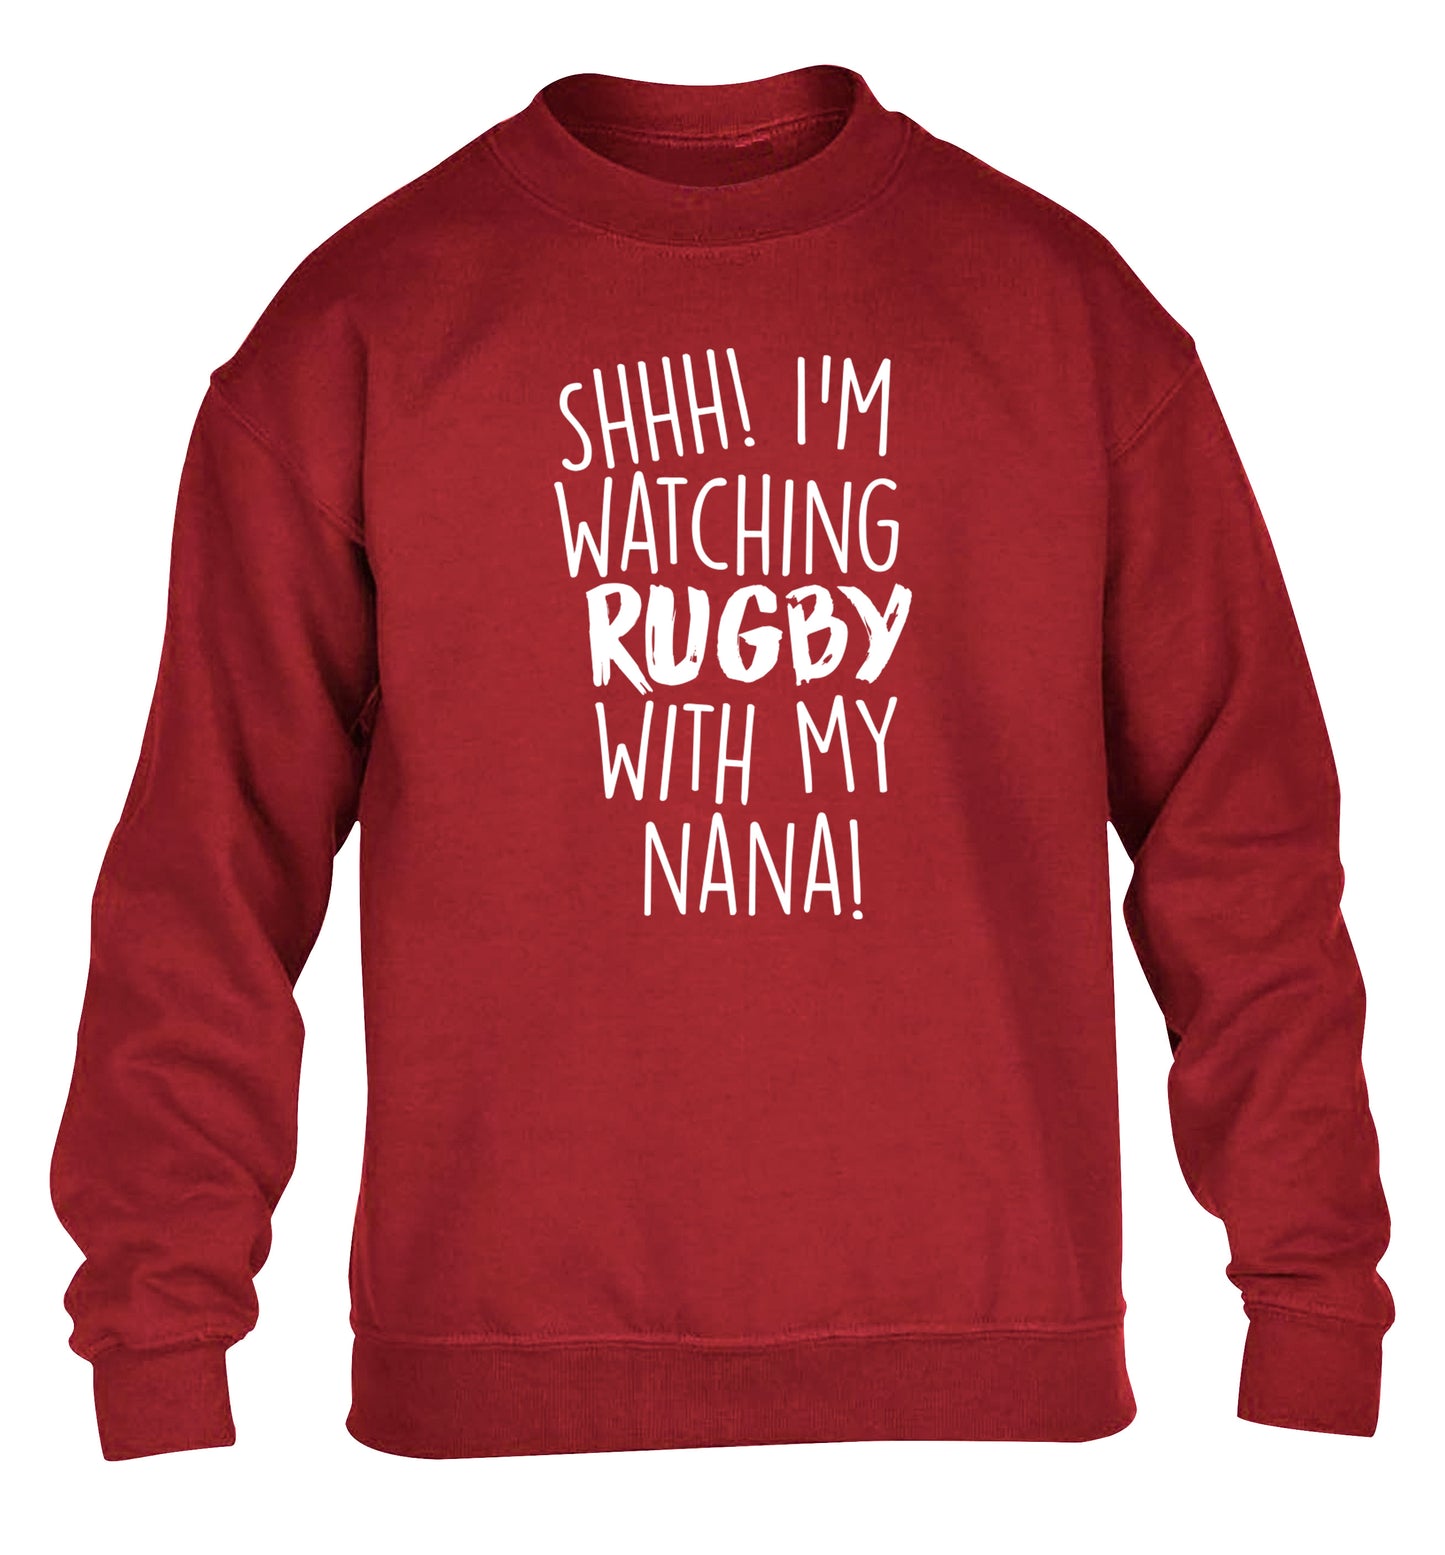 Shh I'm watching rugby with my nana children's grey sweater 12-13 Years